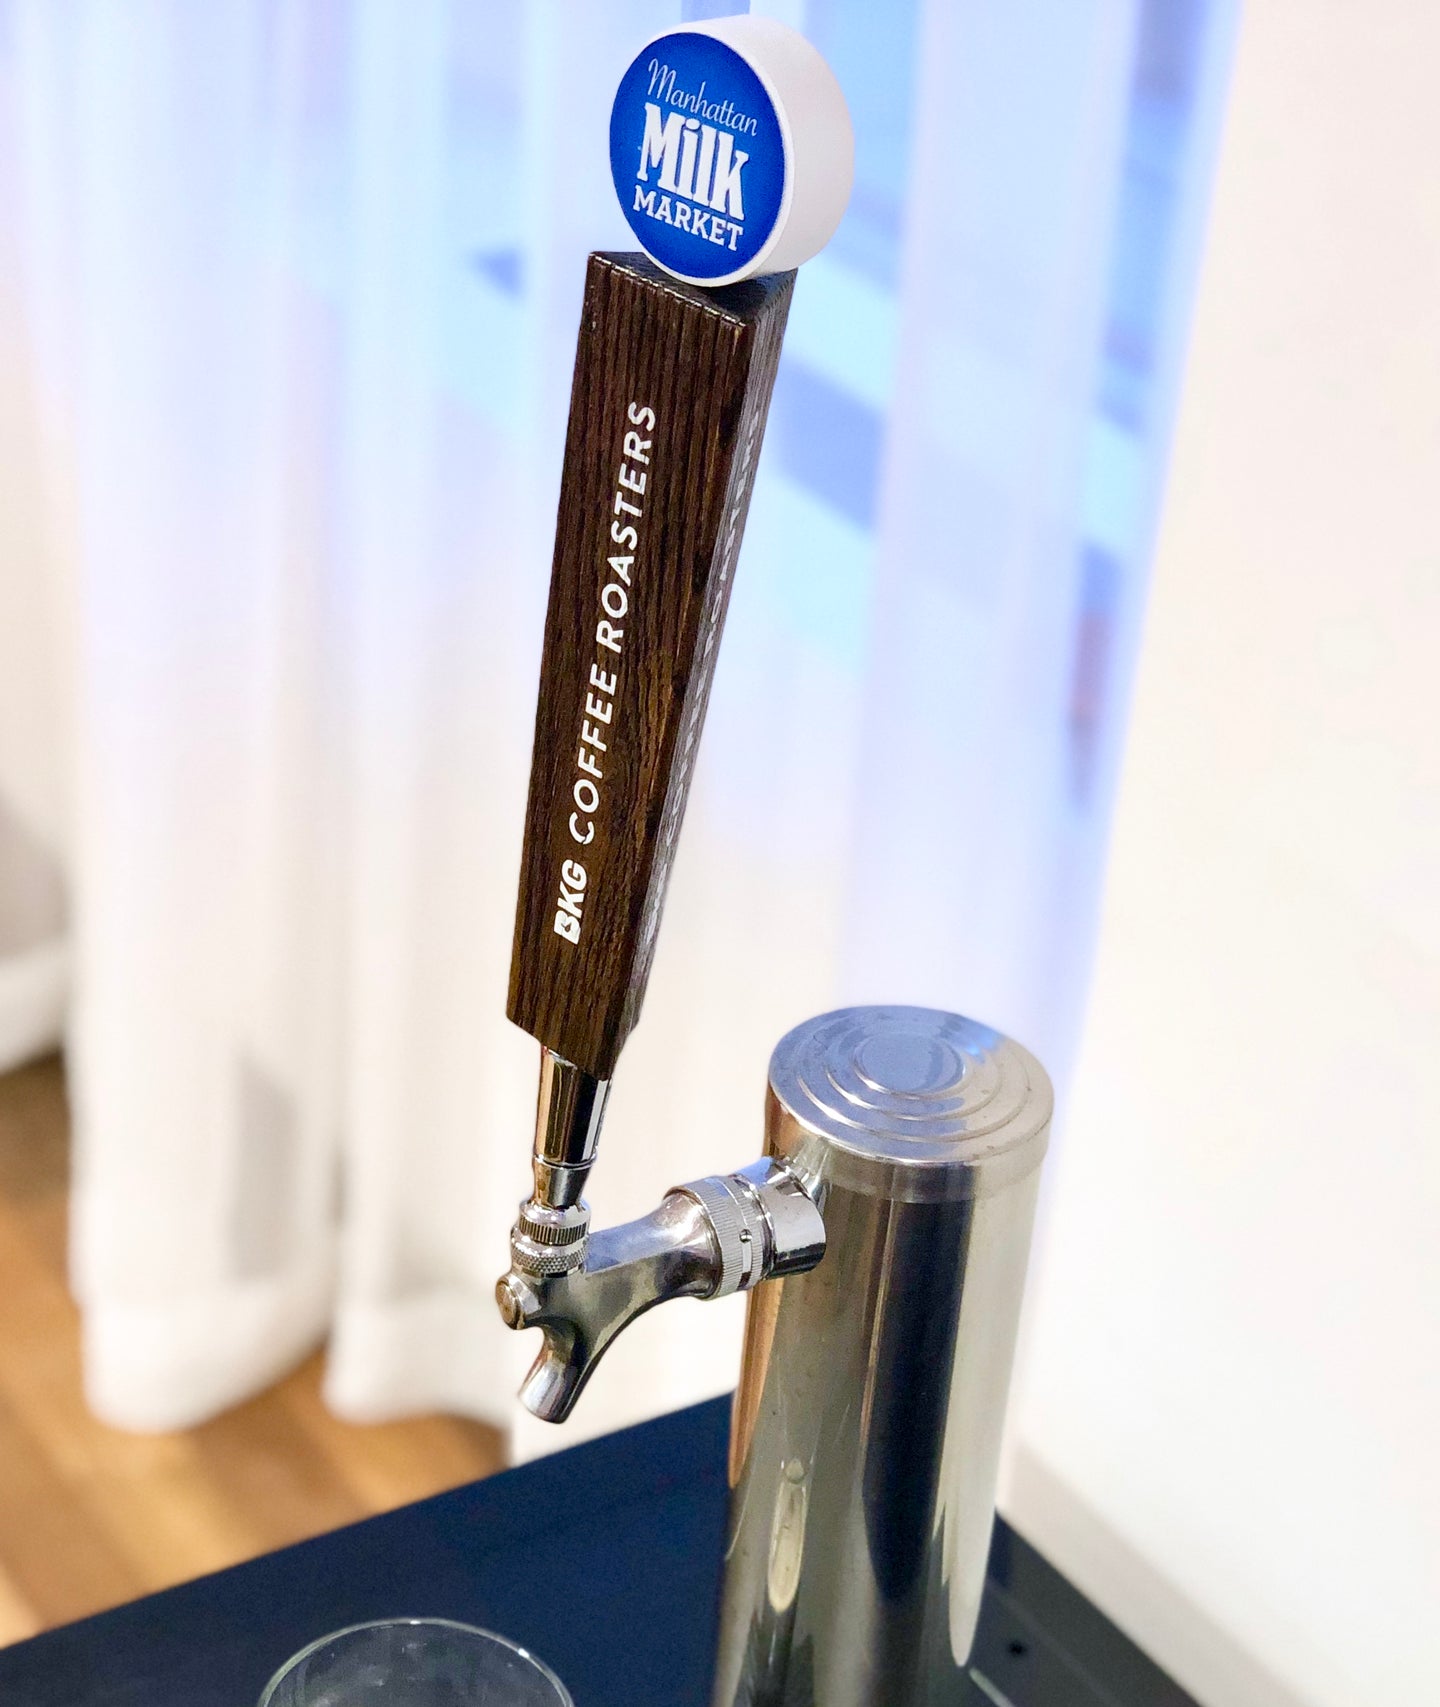 Cold Brew Kegerator for Office